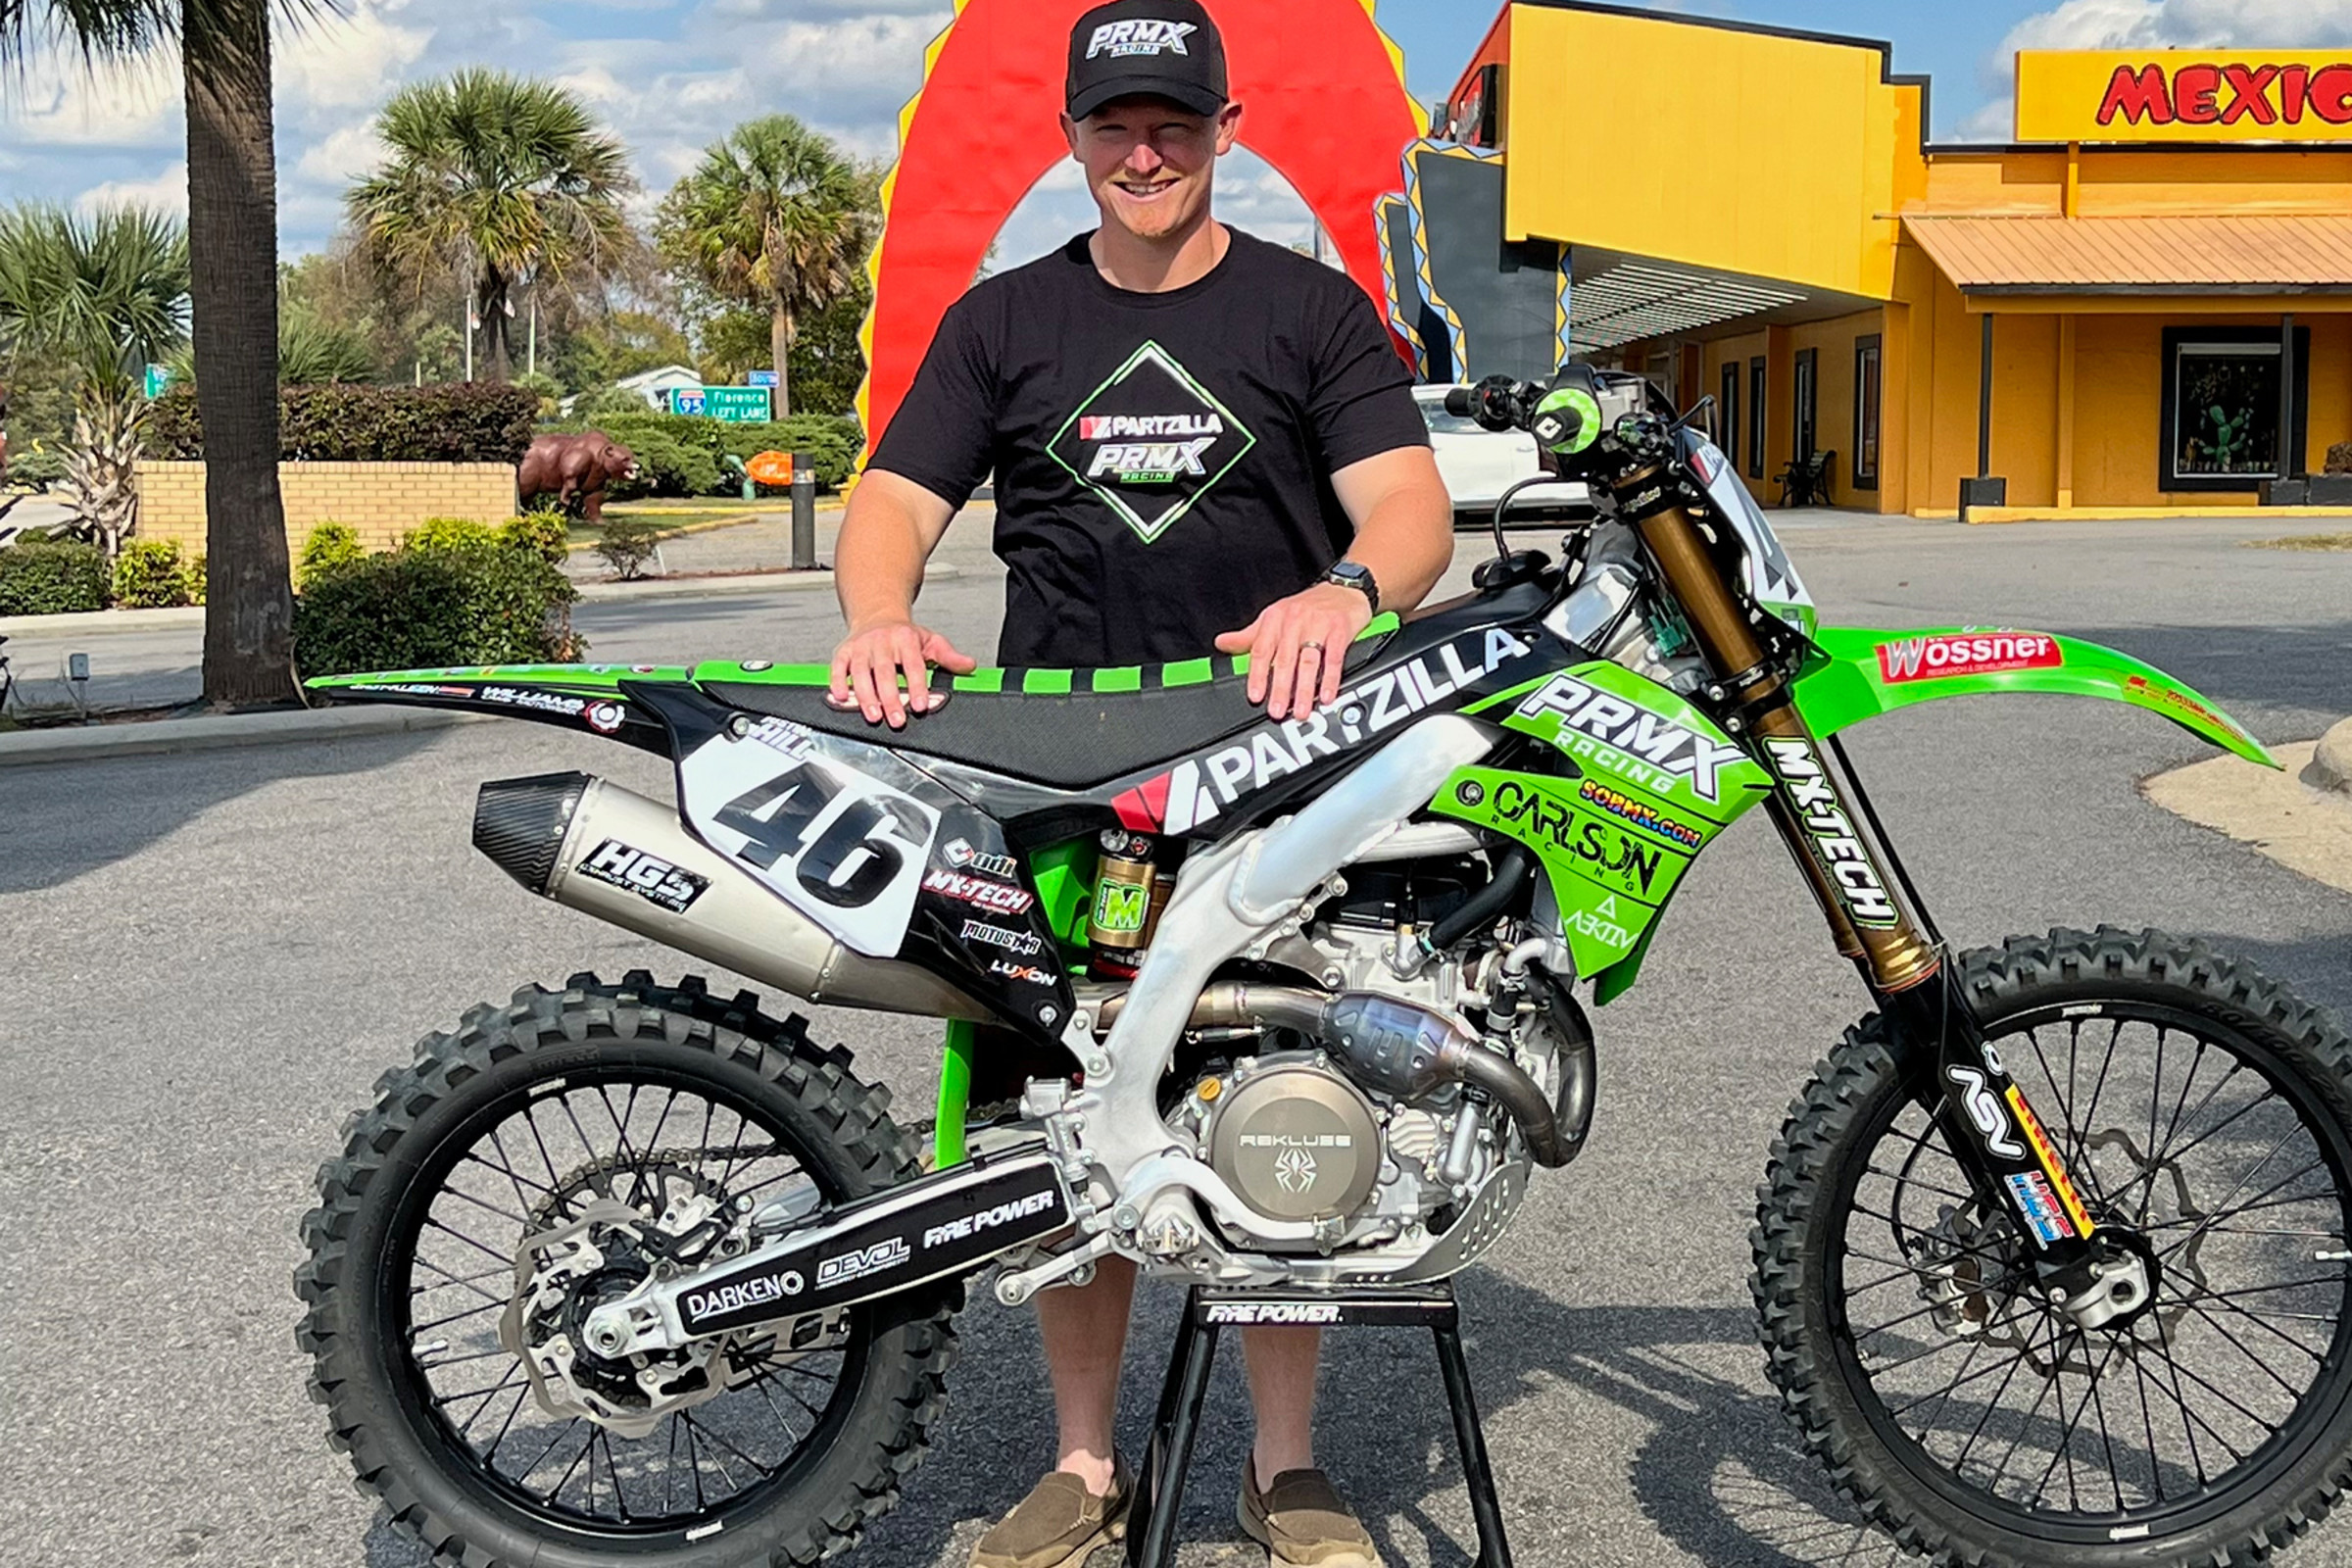 Justin Hill Returns to Professional Racing with Partzilla PRMX Racing